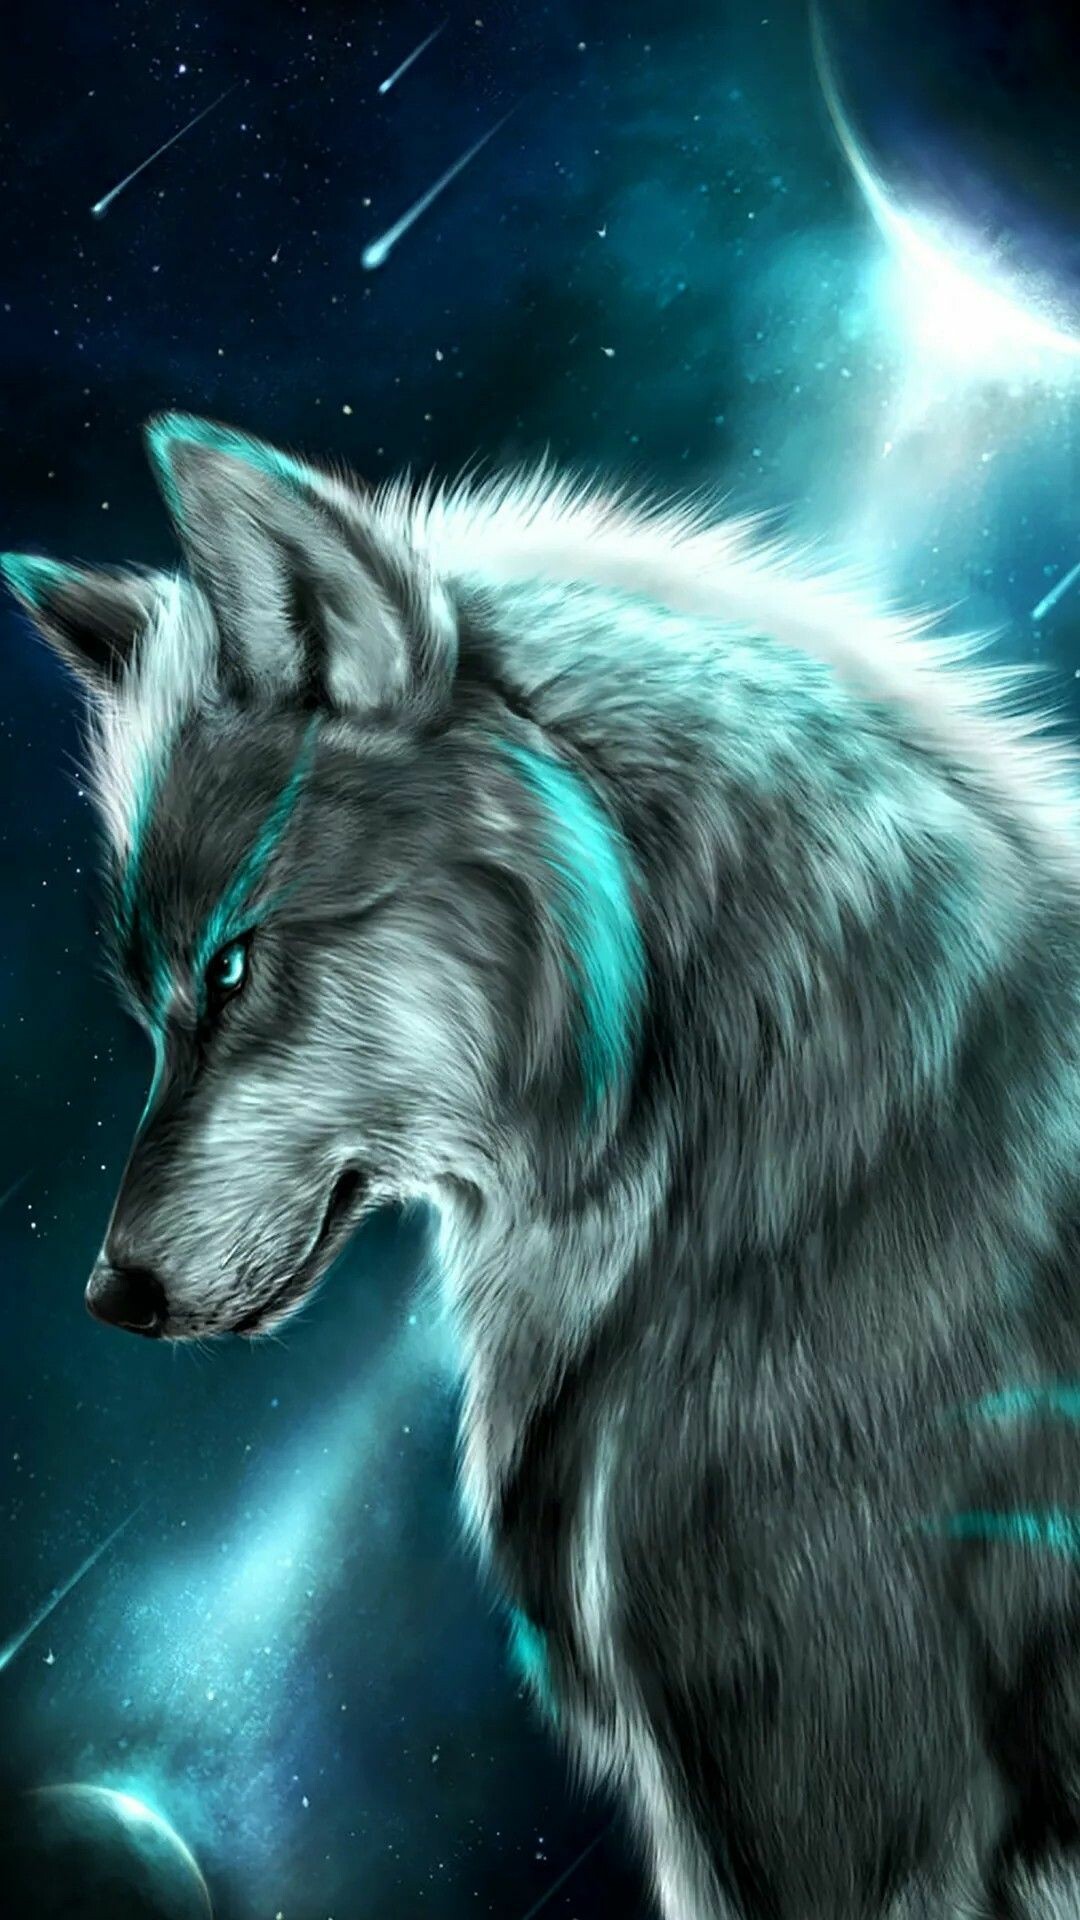 Wolf: Aggressive or self-assertive wolves are characterized by their slow and deliberate movements, high body posture, and raised hackles, while submissive ones carry their bodies low, flatten their fur, and lower their ears and tail. 1080x1920 Full HD Background.